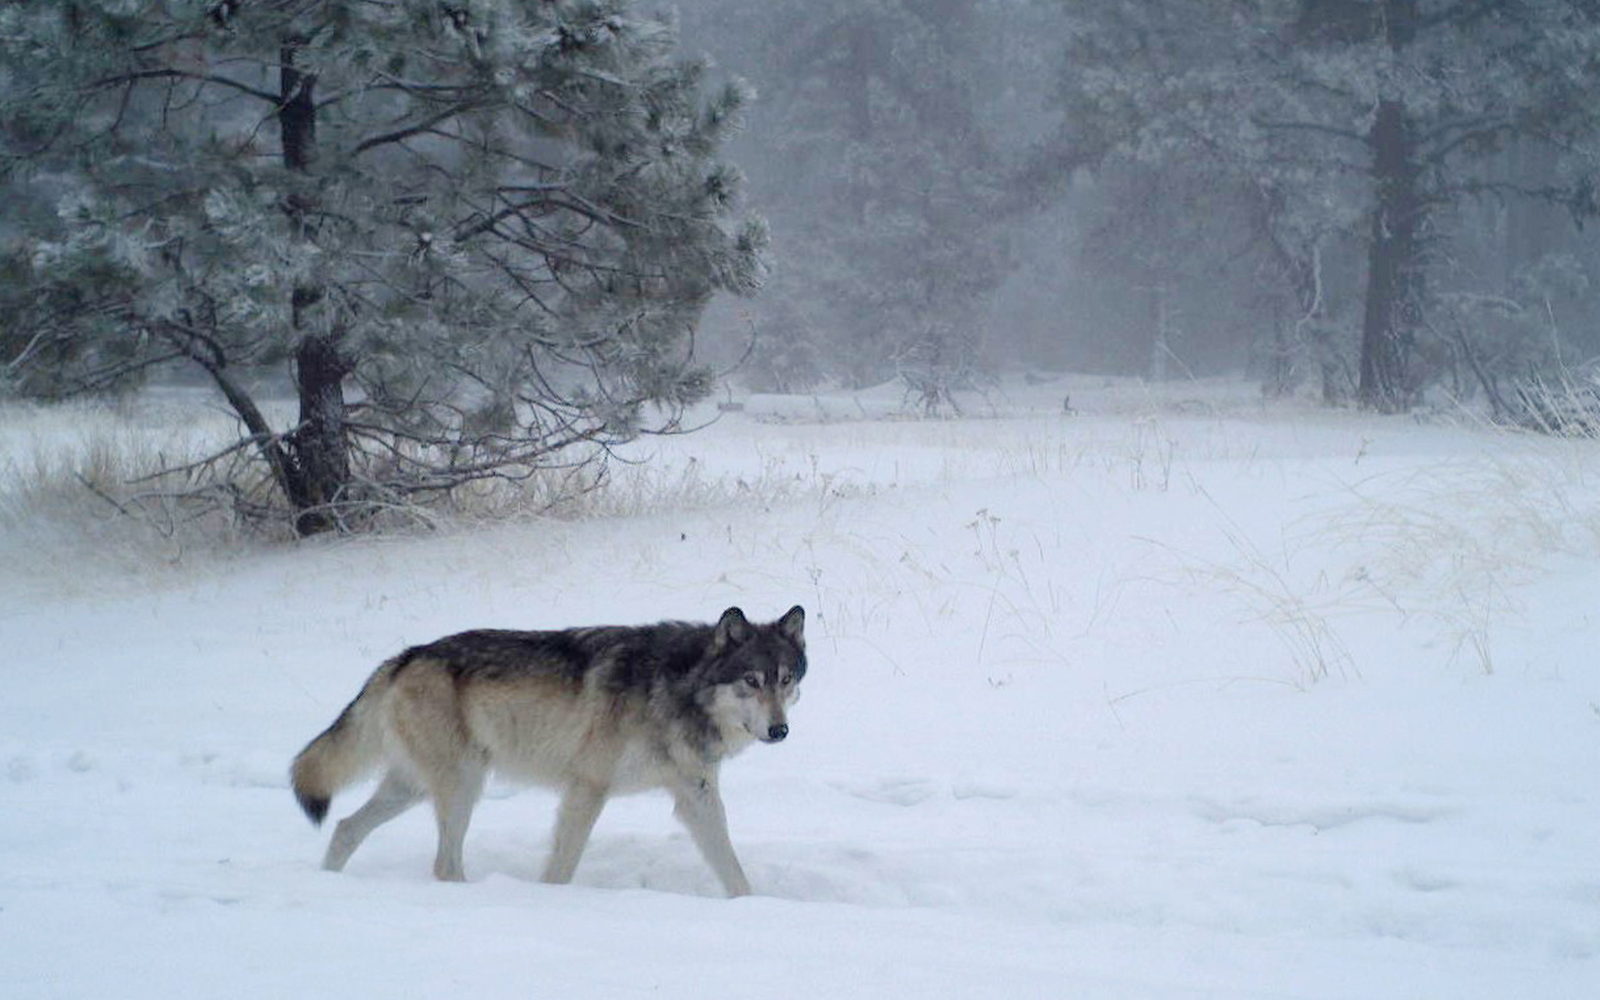 Press Release: $15,000 Reward Offered for Info on Oregon Wolf Killed Illegally in Late 2022